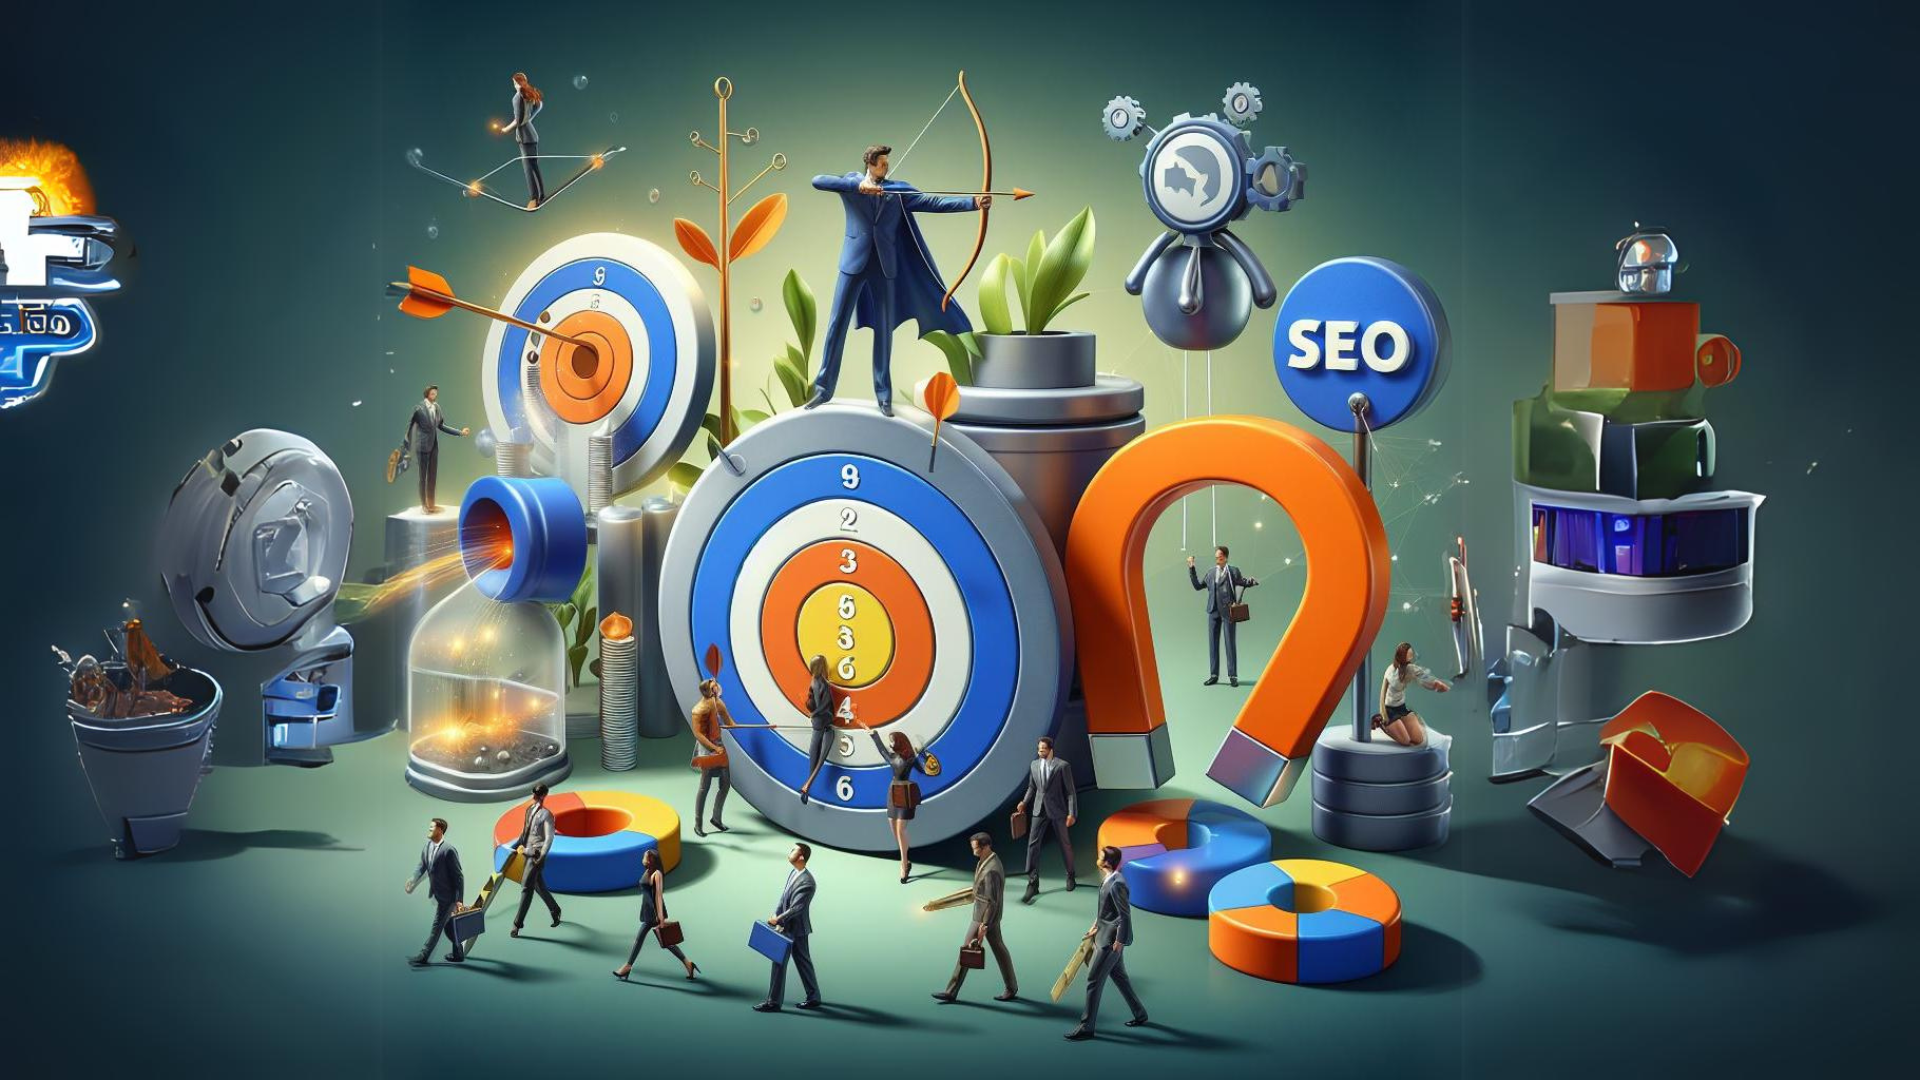 Benefits of SEO : SEO superpowers